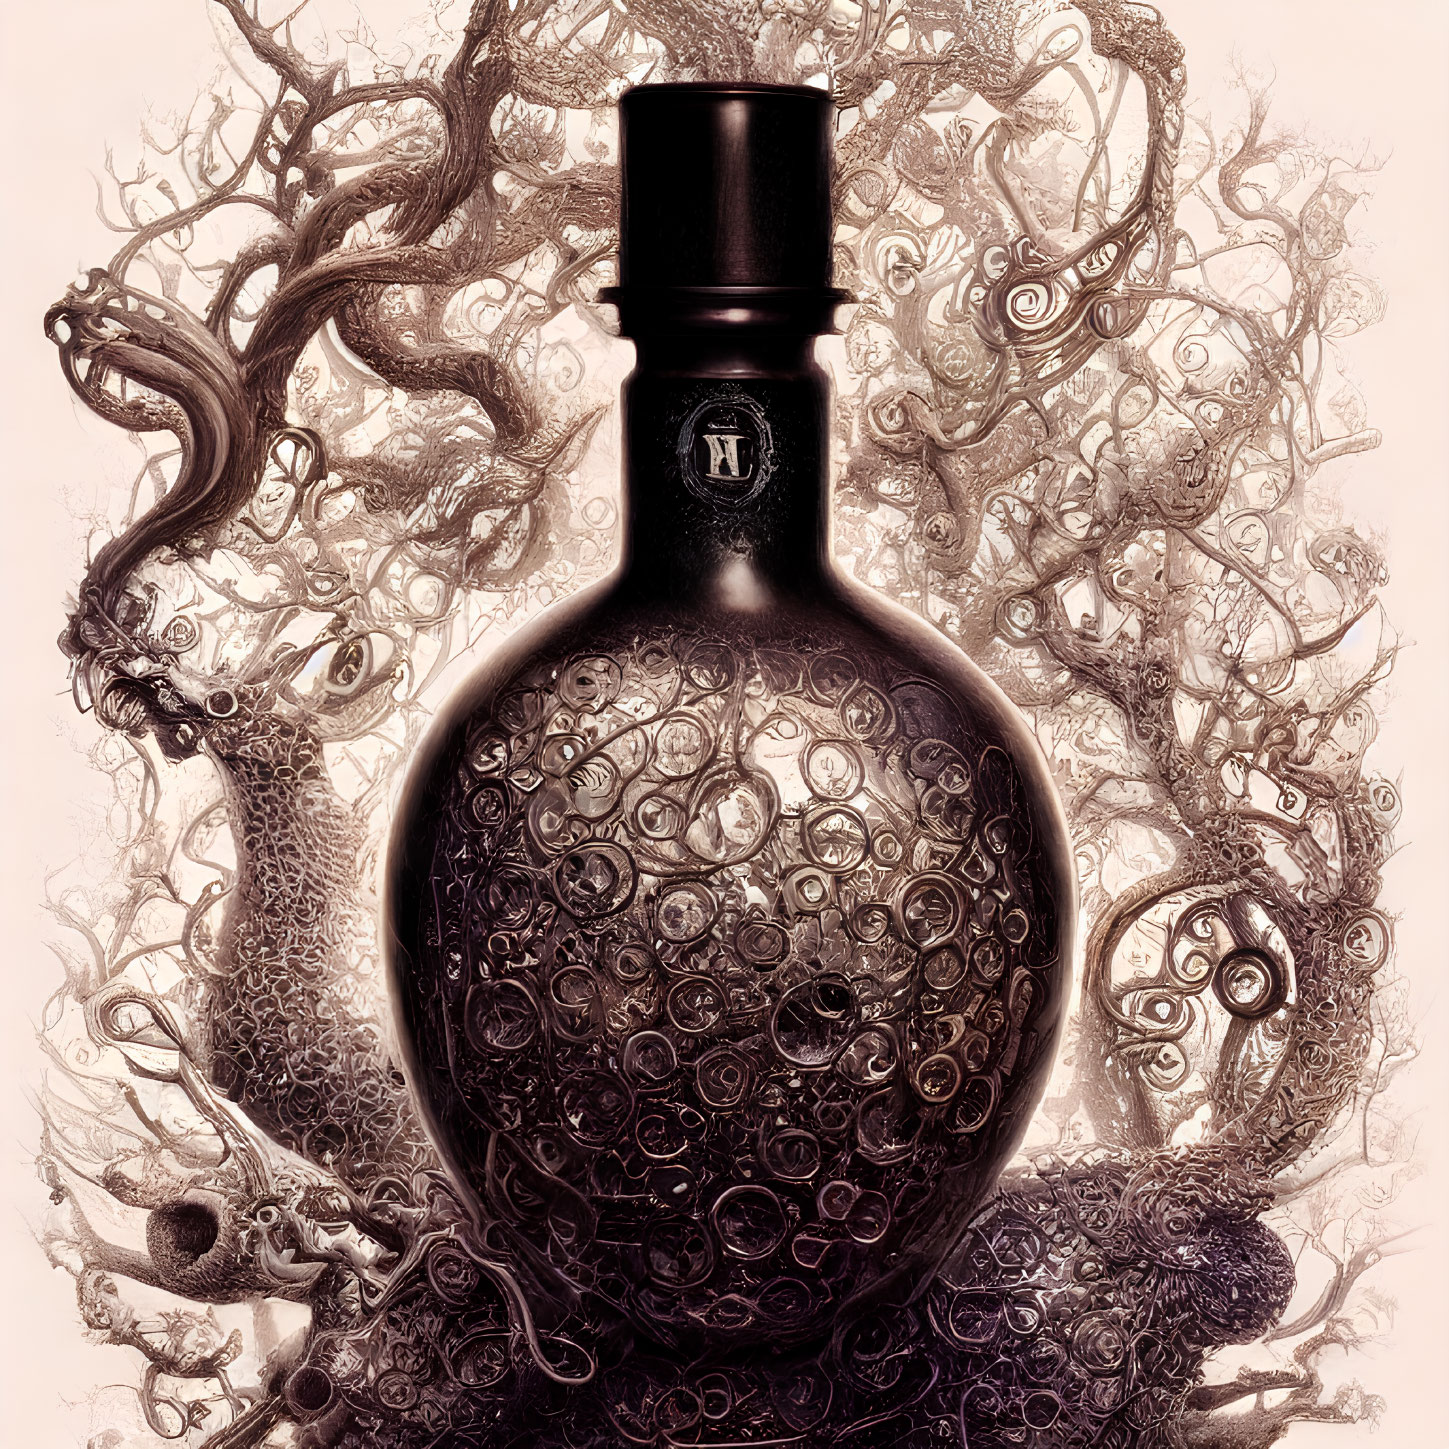 Intricately designed dark bottle with monogrammed emblem and swirling sepia pattern